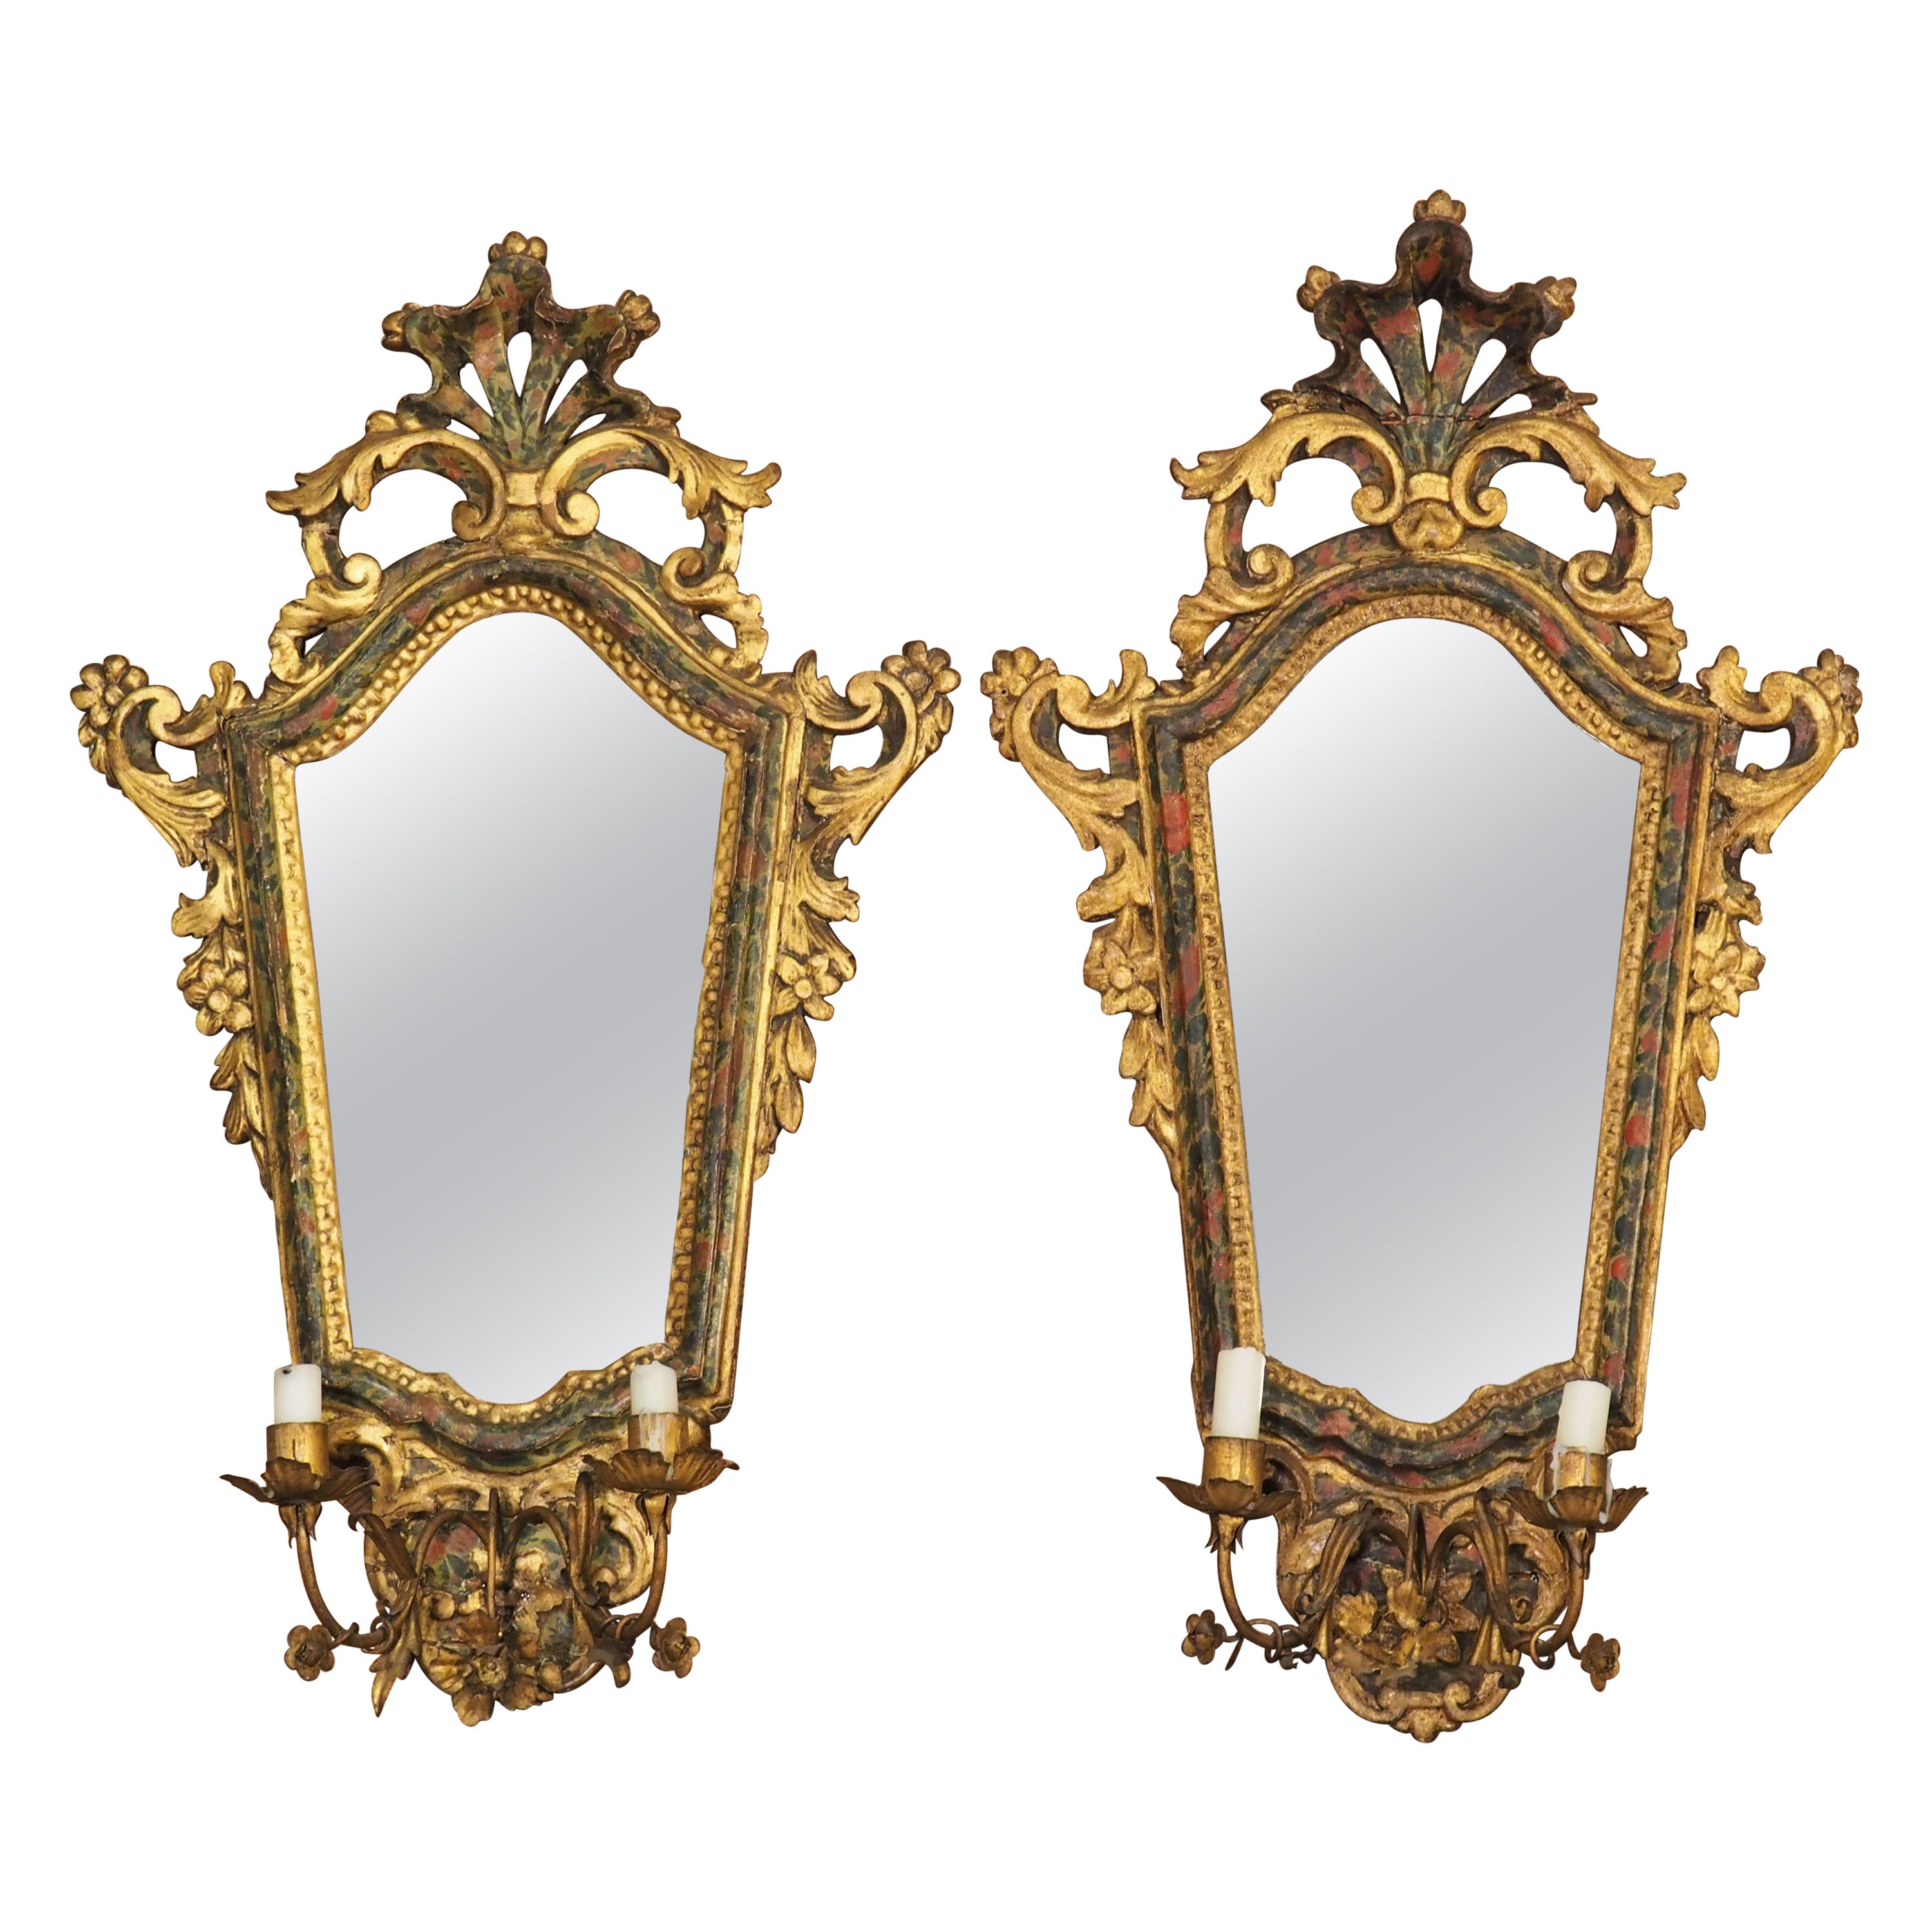 Pair of Early 18th Century Polychrome Venetian Mirrored Sconces